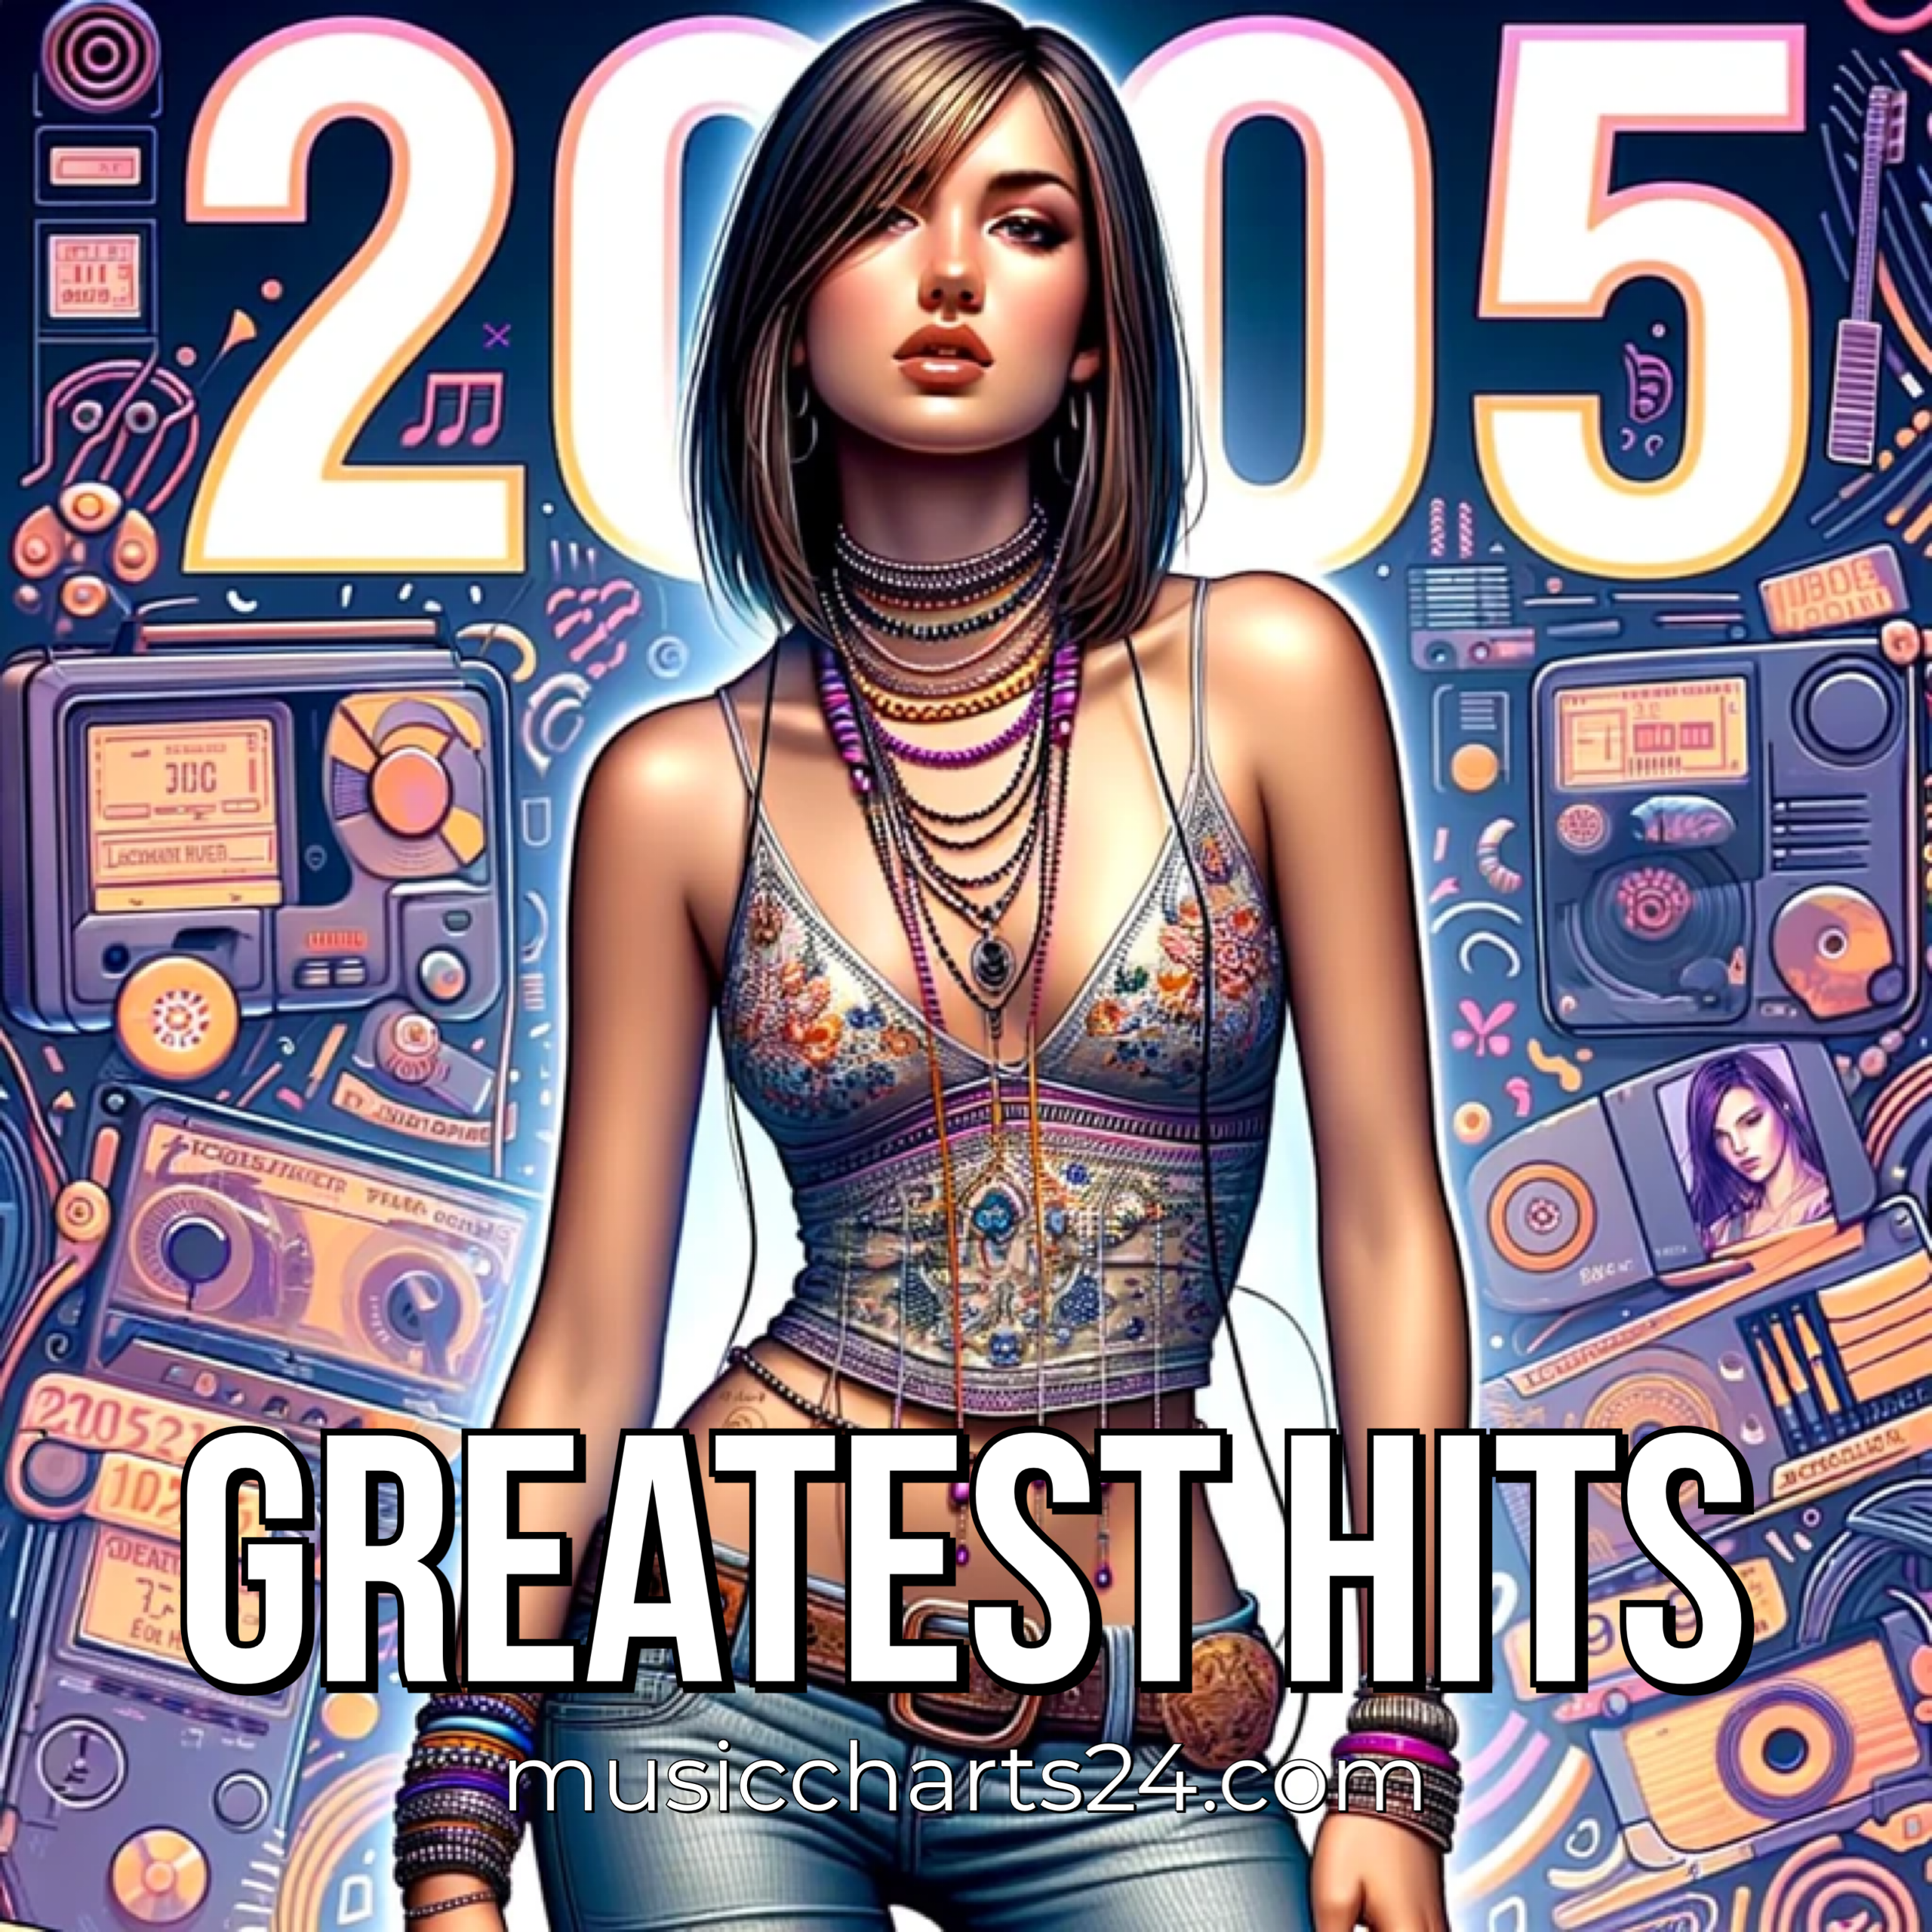 Top 2005 Hits: Best Music Charts of the Year